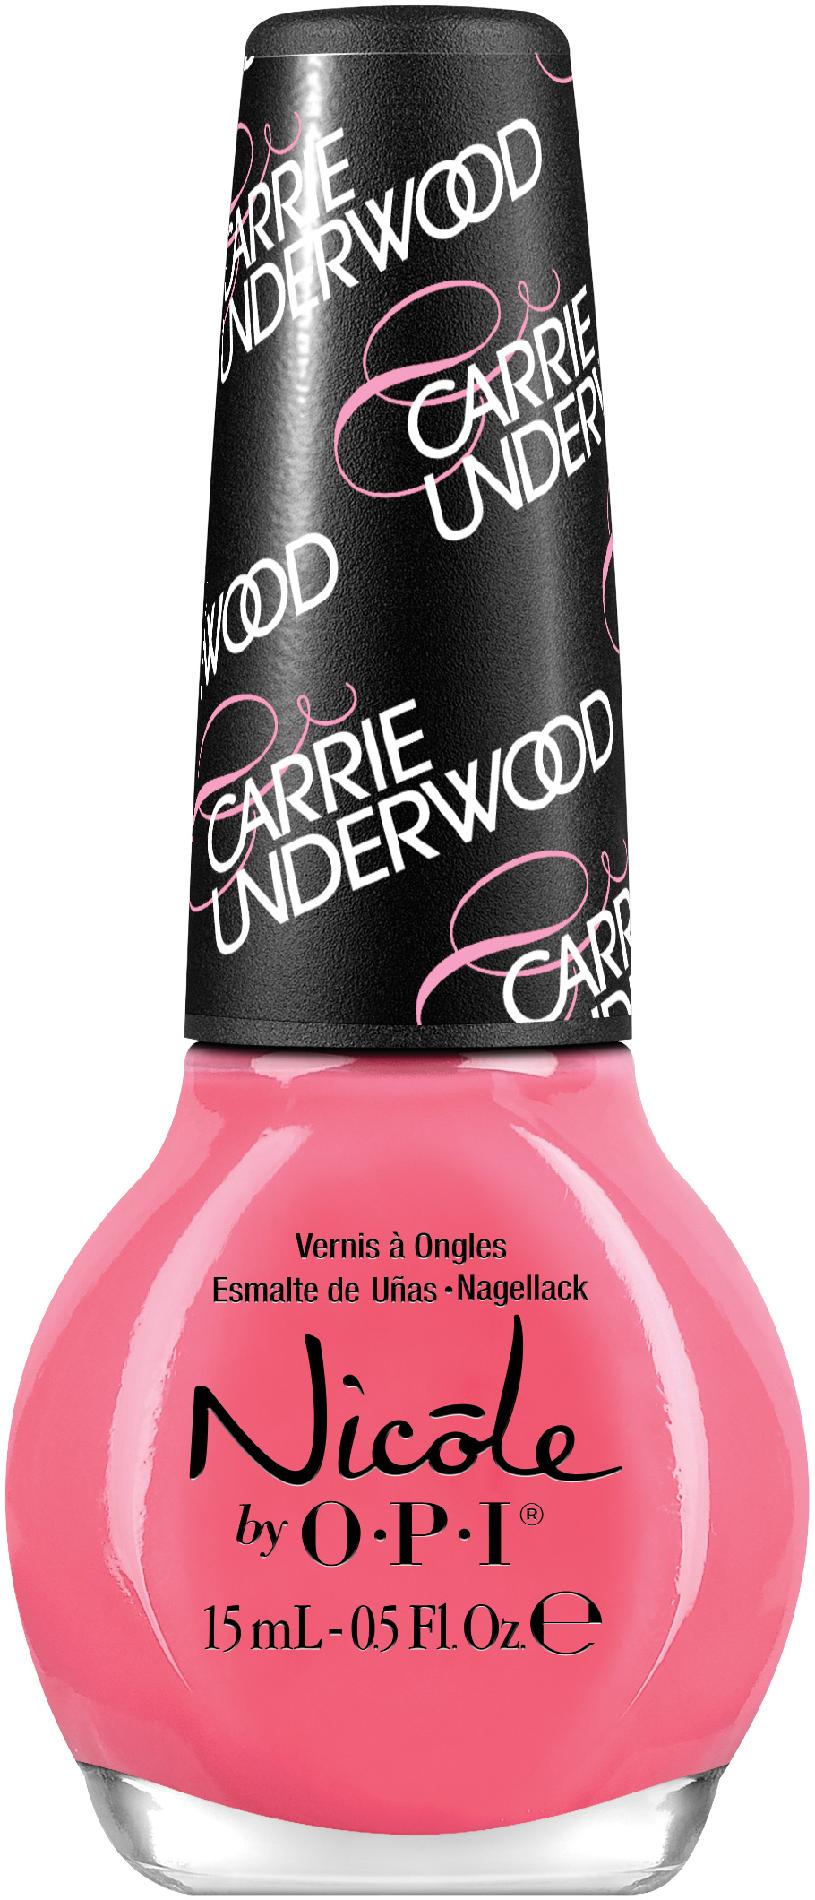 Carrie Underwood, Nail Lacquers, Color Me Country, 0.5 fl oz.